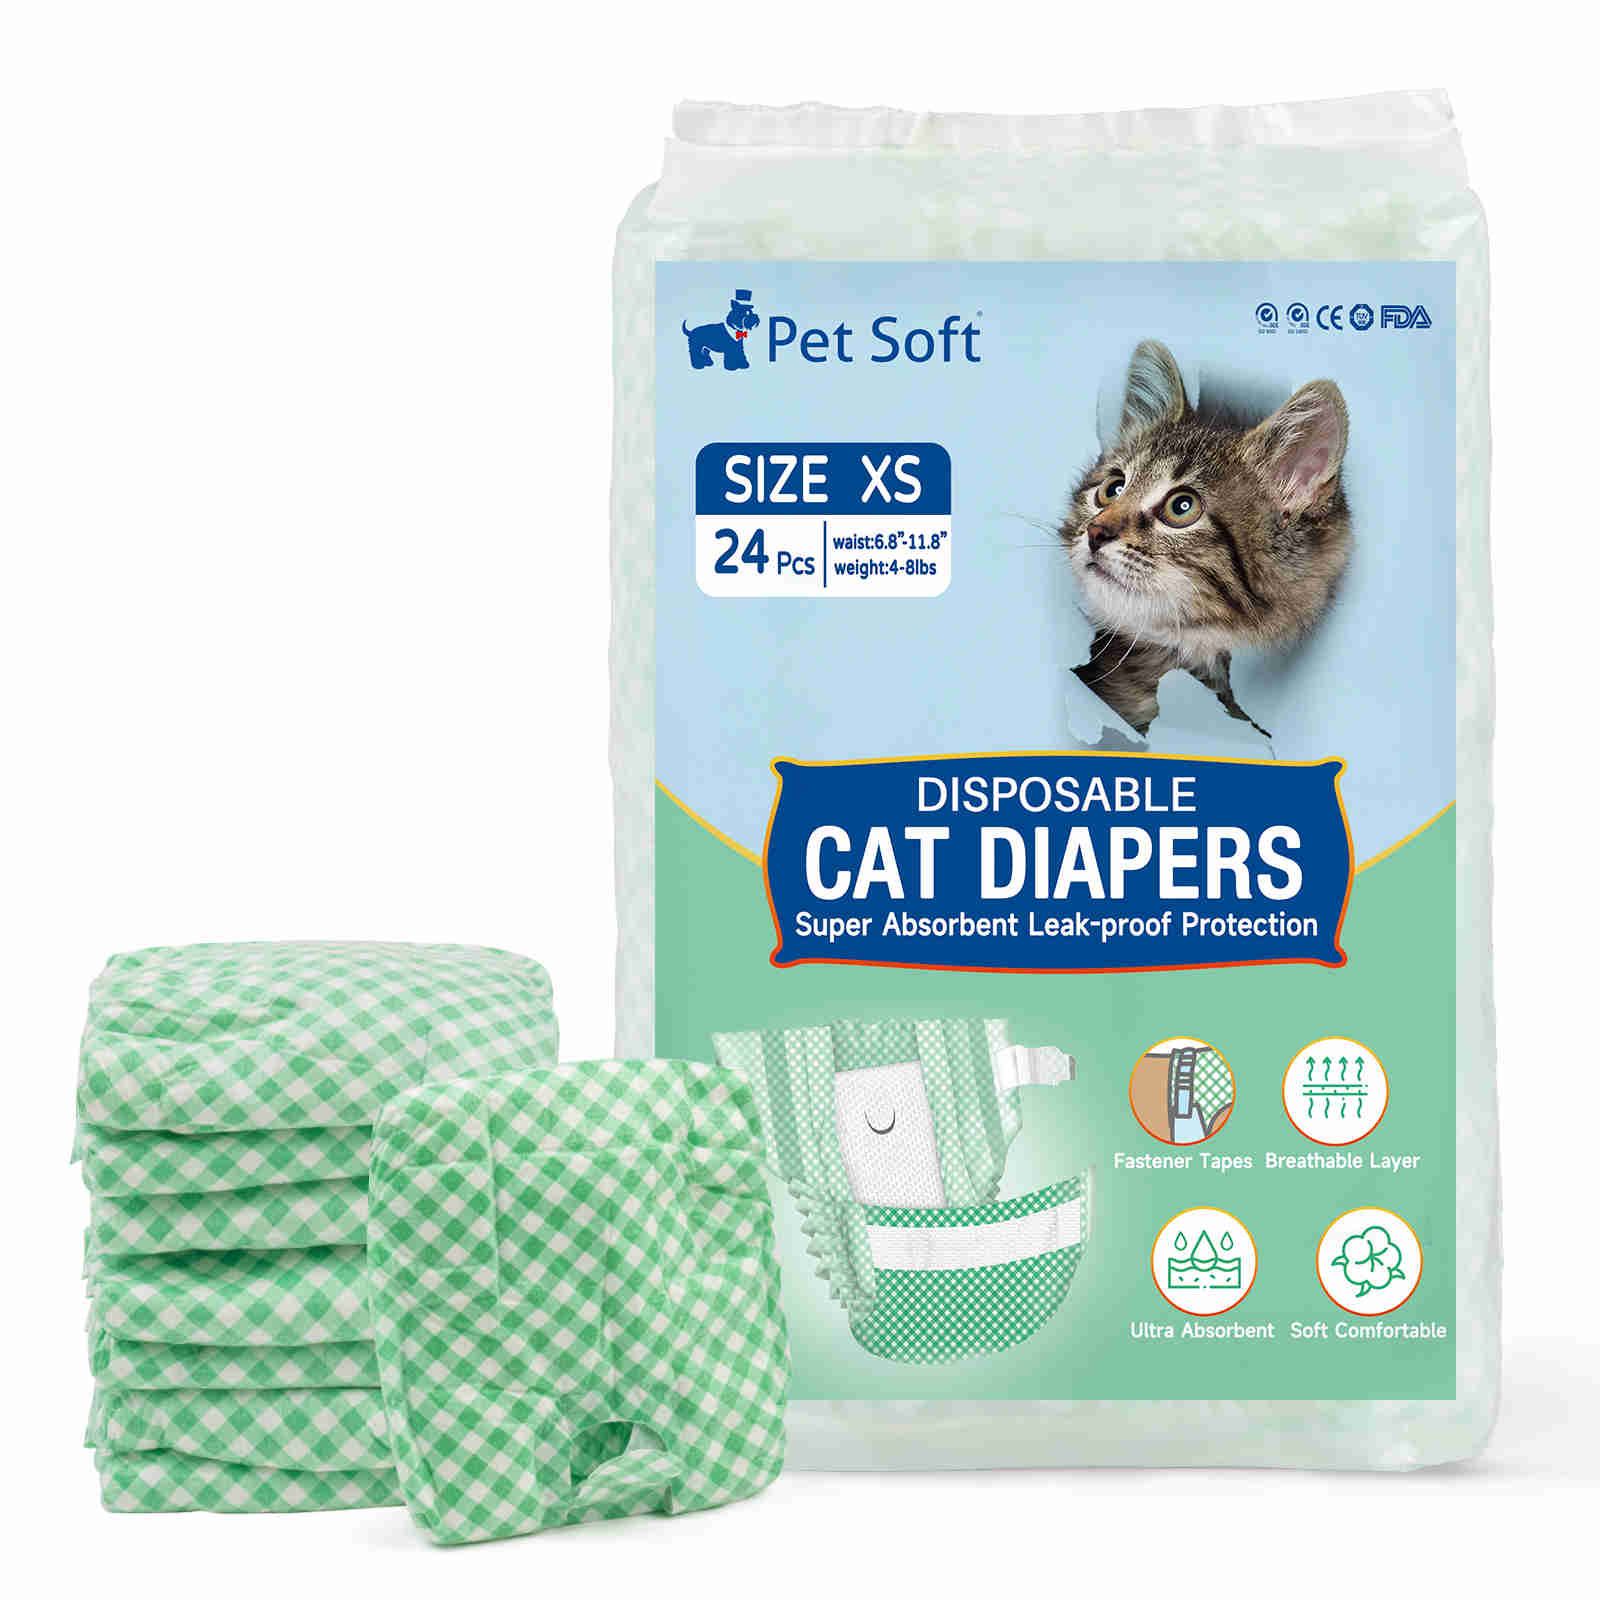 Disposable Cat Diapers, Green Plaid Pattern, 24 Pcs, 1 Pack